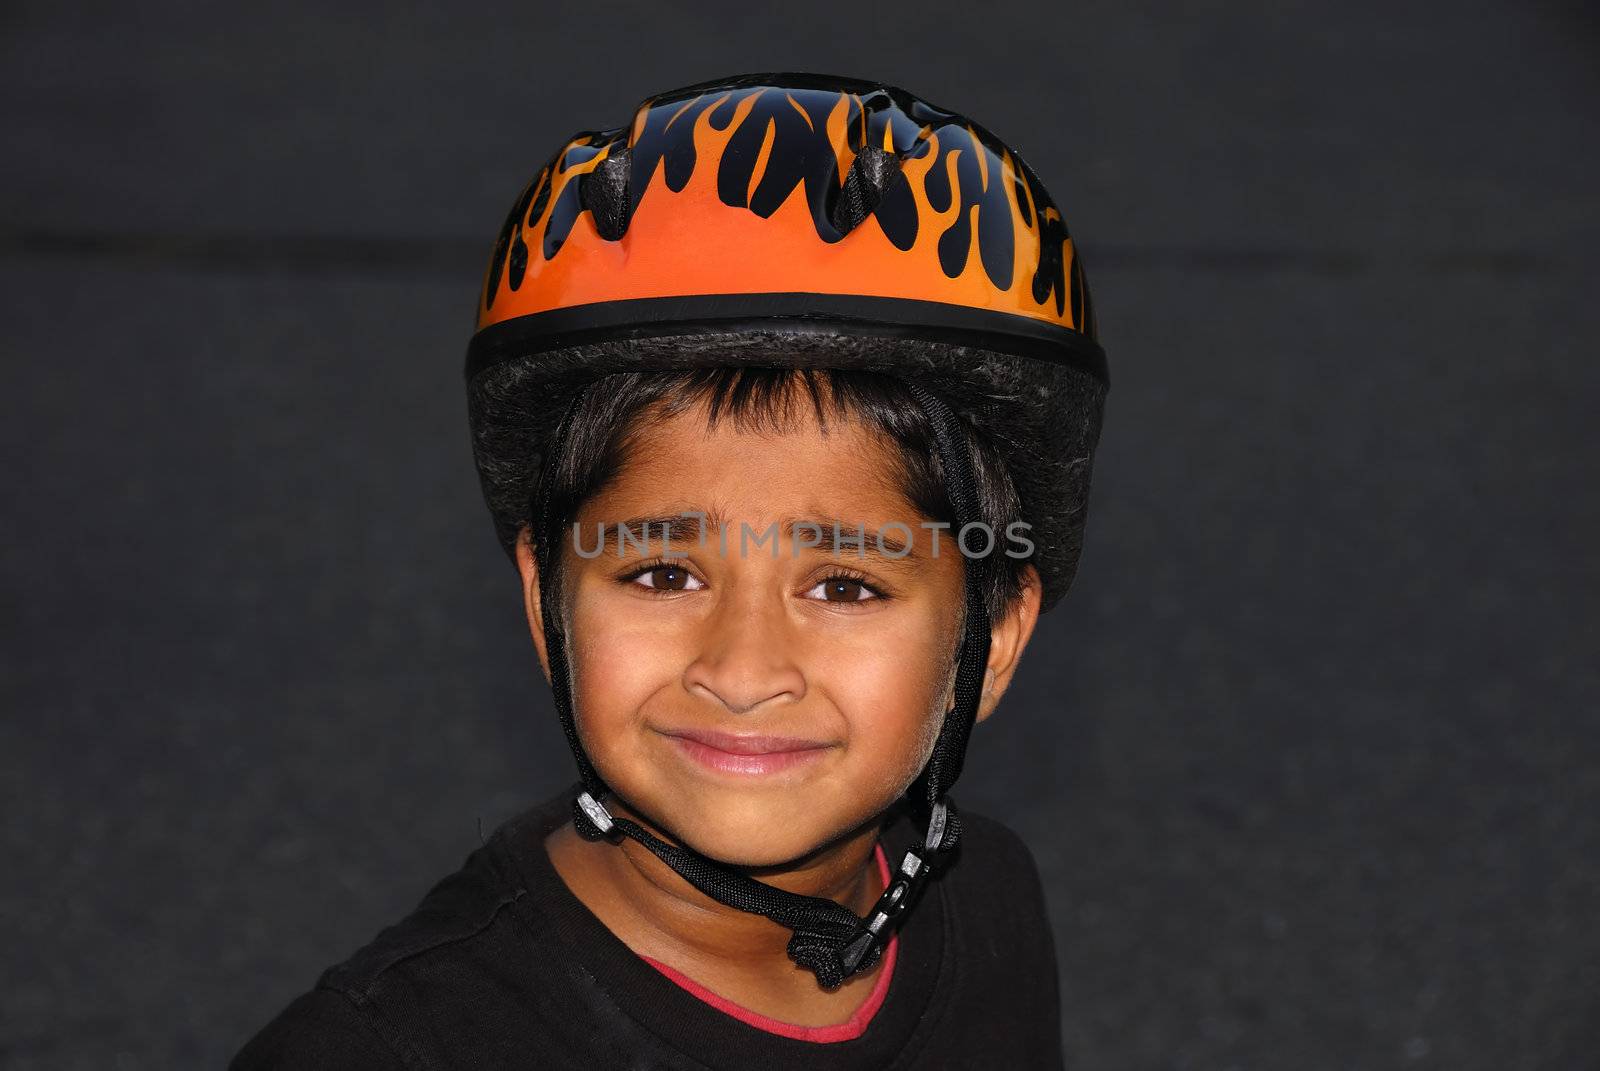 An handsome Indian kid wearing an helmet for safety